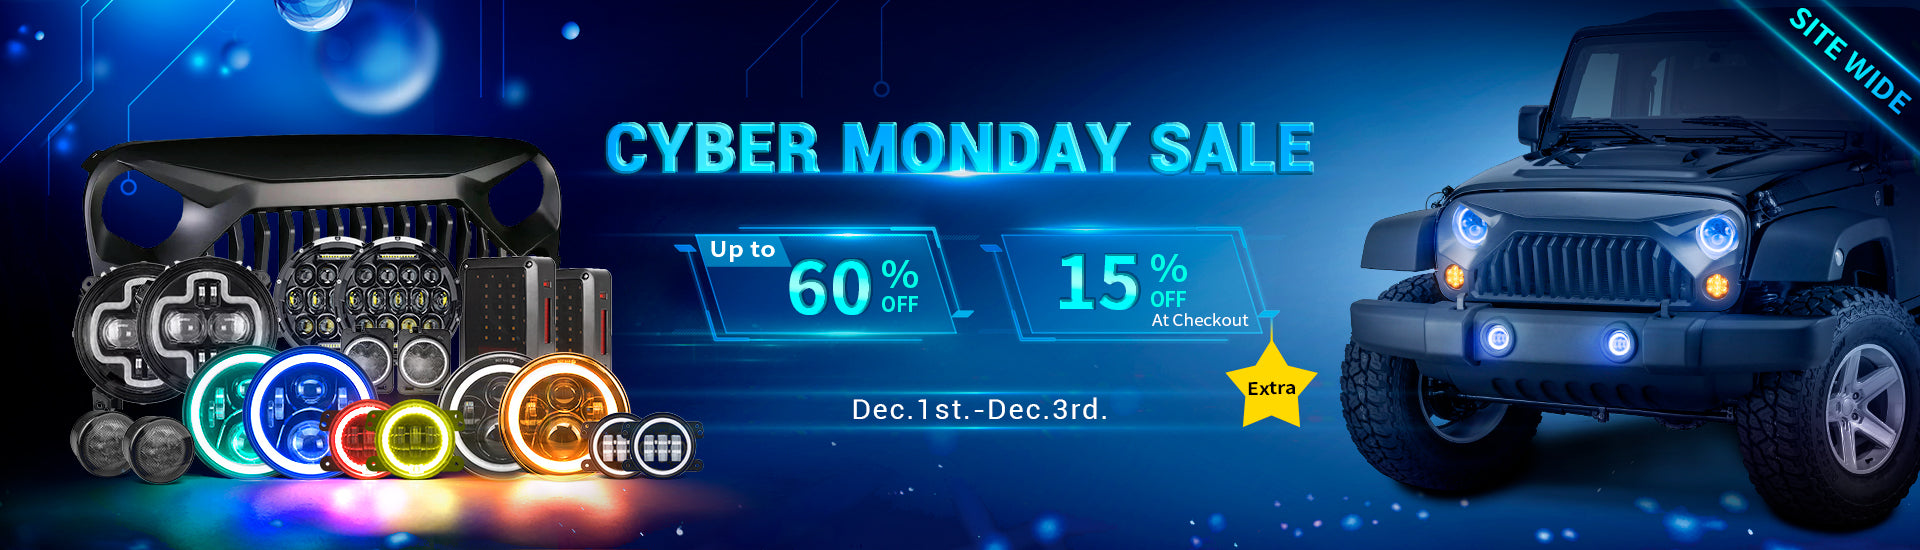 Cyber Week Relay Sale. Up to 60% OFF.